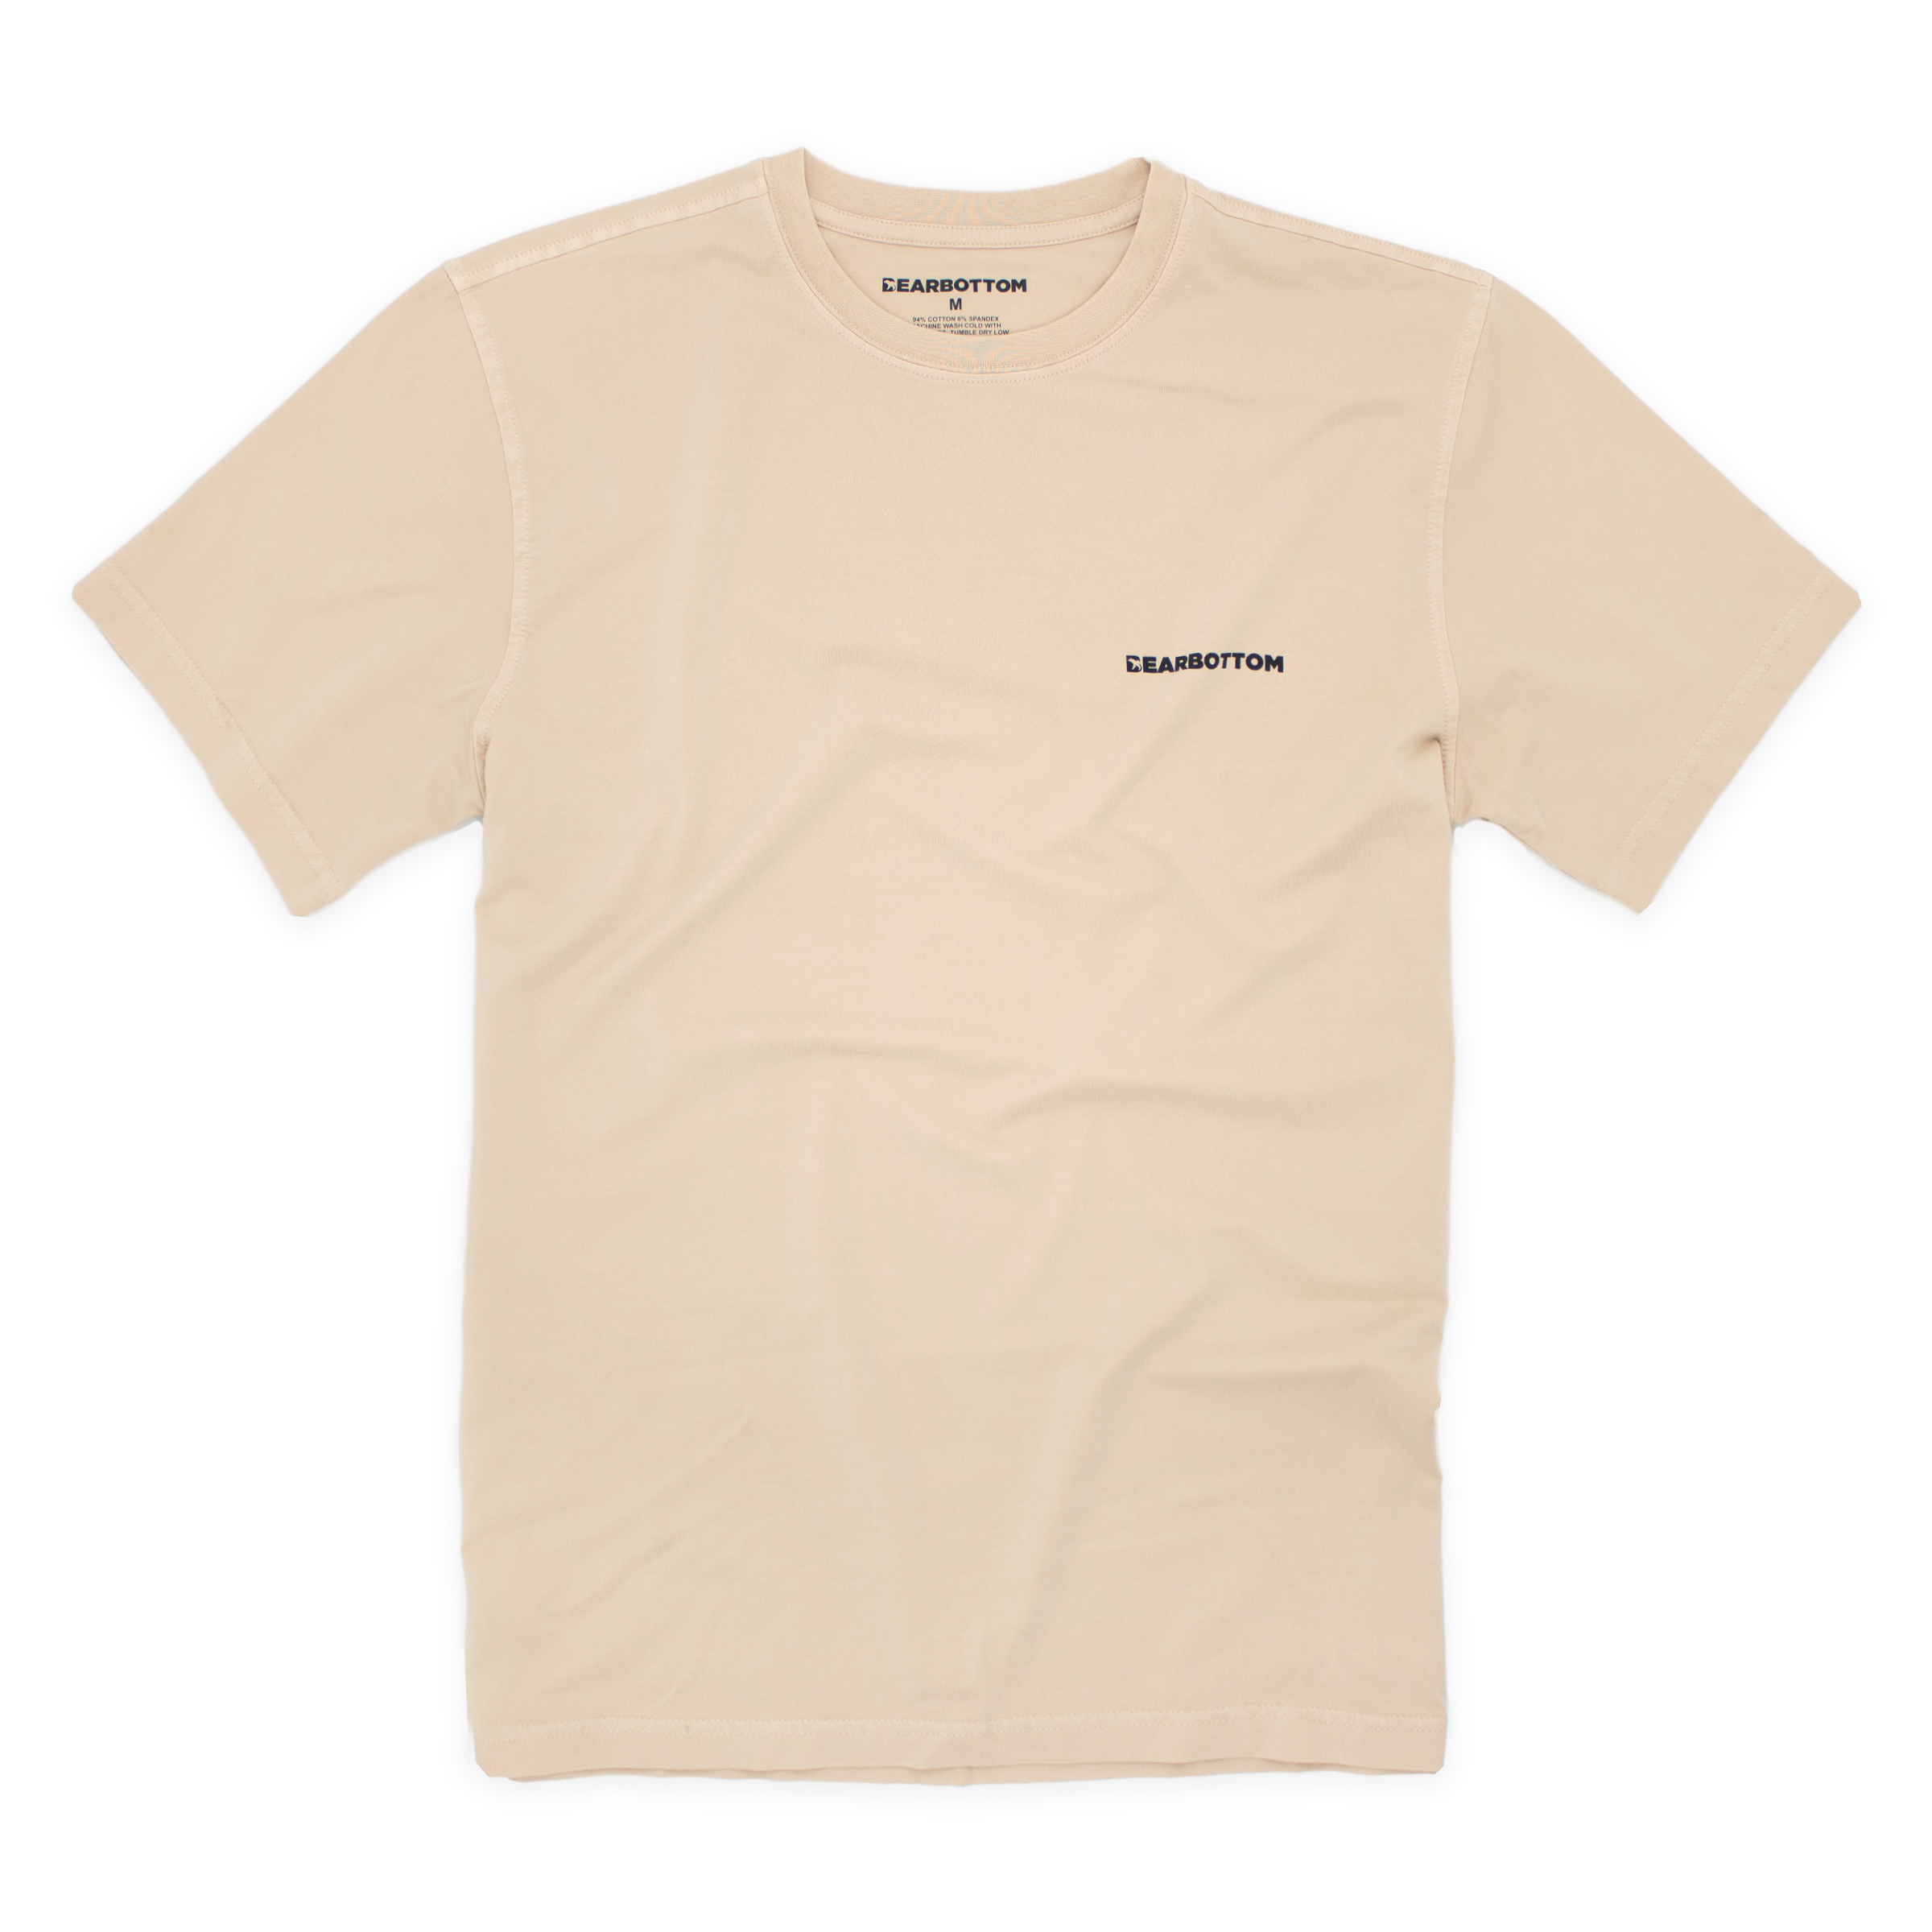 Natural Dye Logo Tee Sand Front with crew neck, short sleeves, and Bearbottom logo printed on front left chest